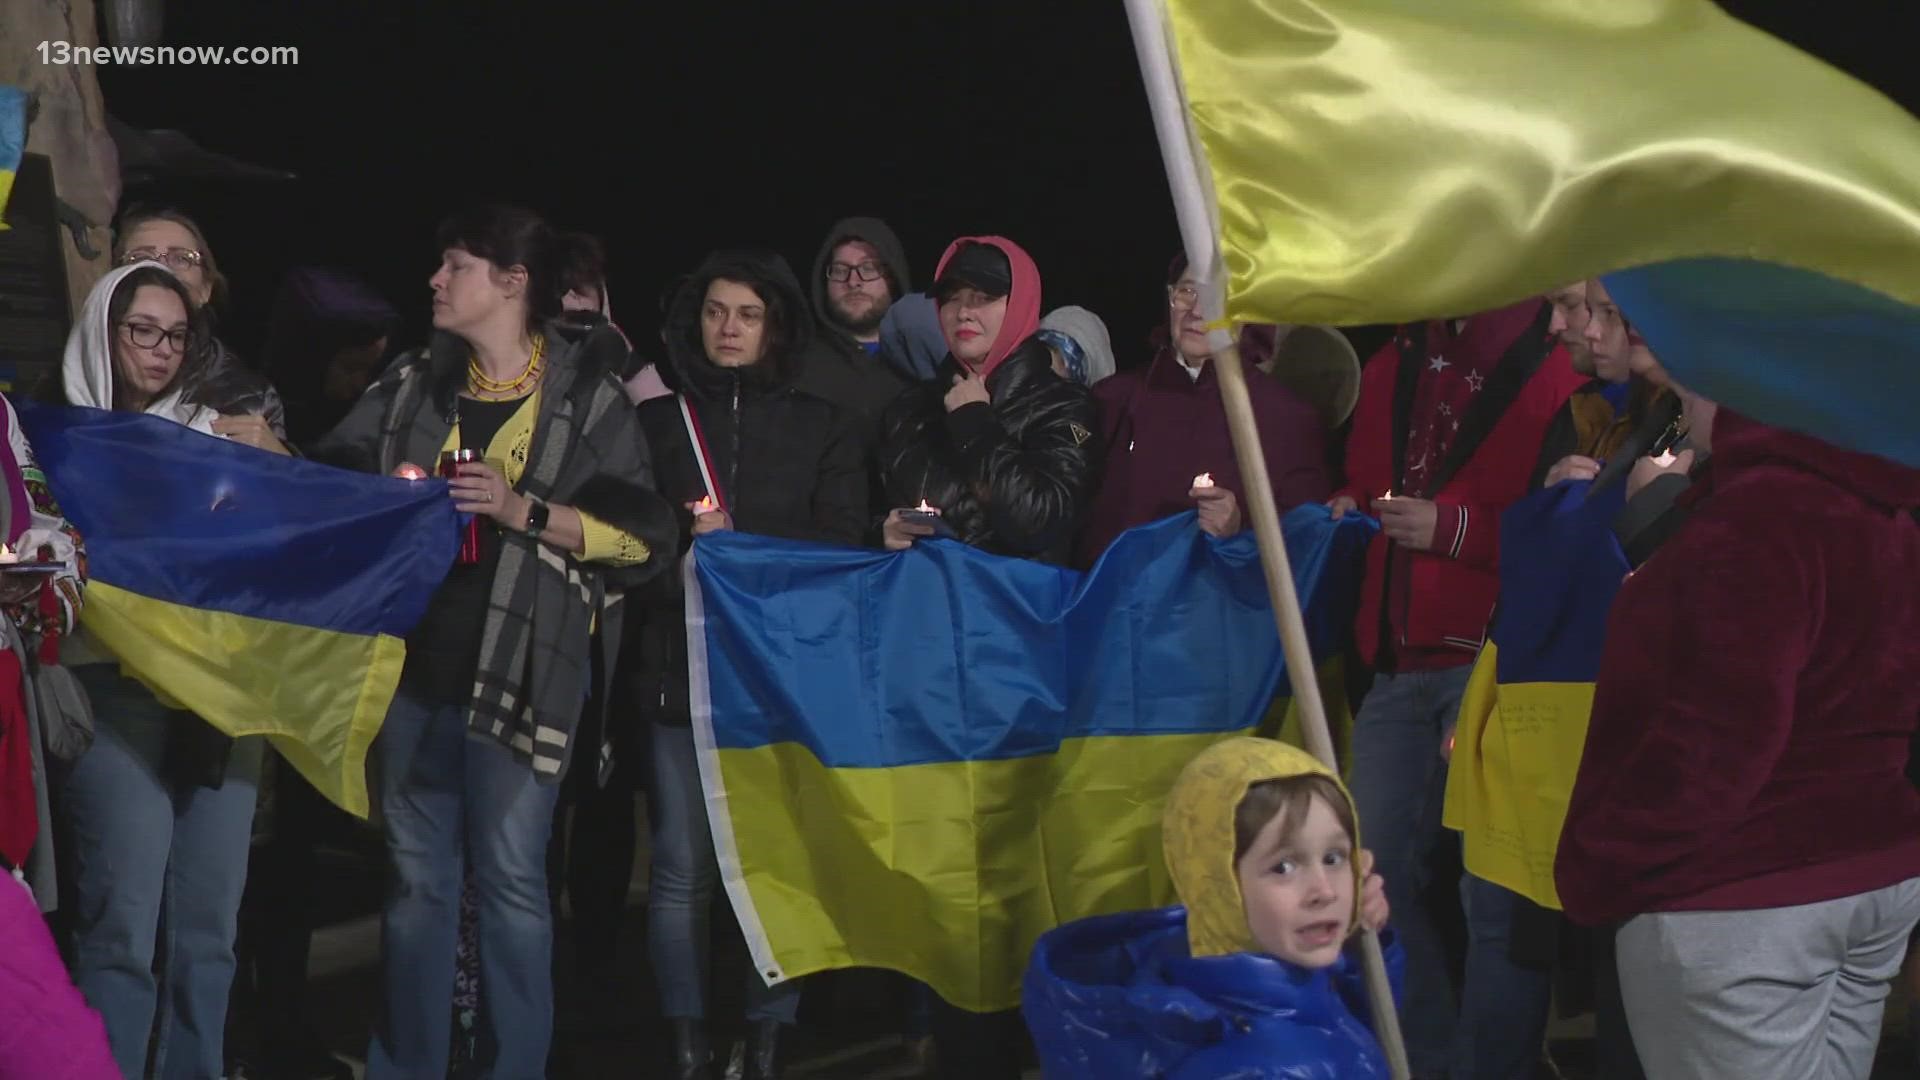 The Tidewater Ukrainian Cultural Association gathered about 30 people at the Virginia Beach Oceanfront for a candlelight vigil to mark the day.